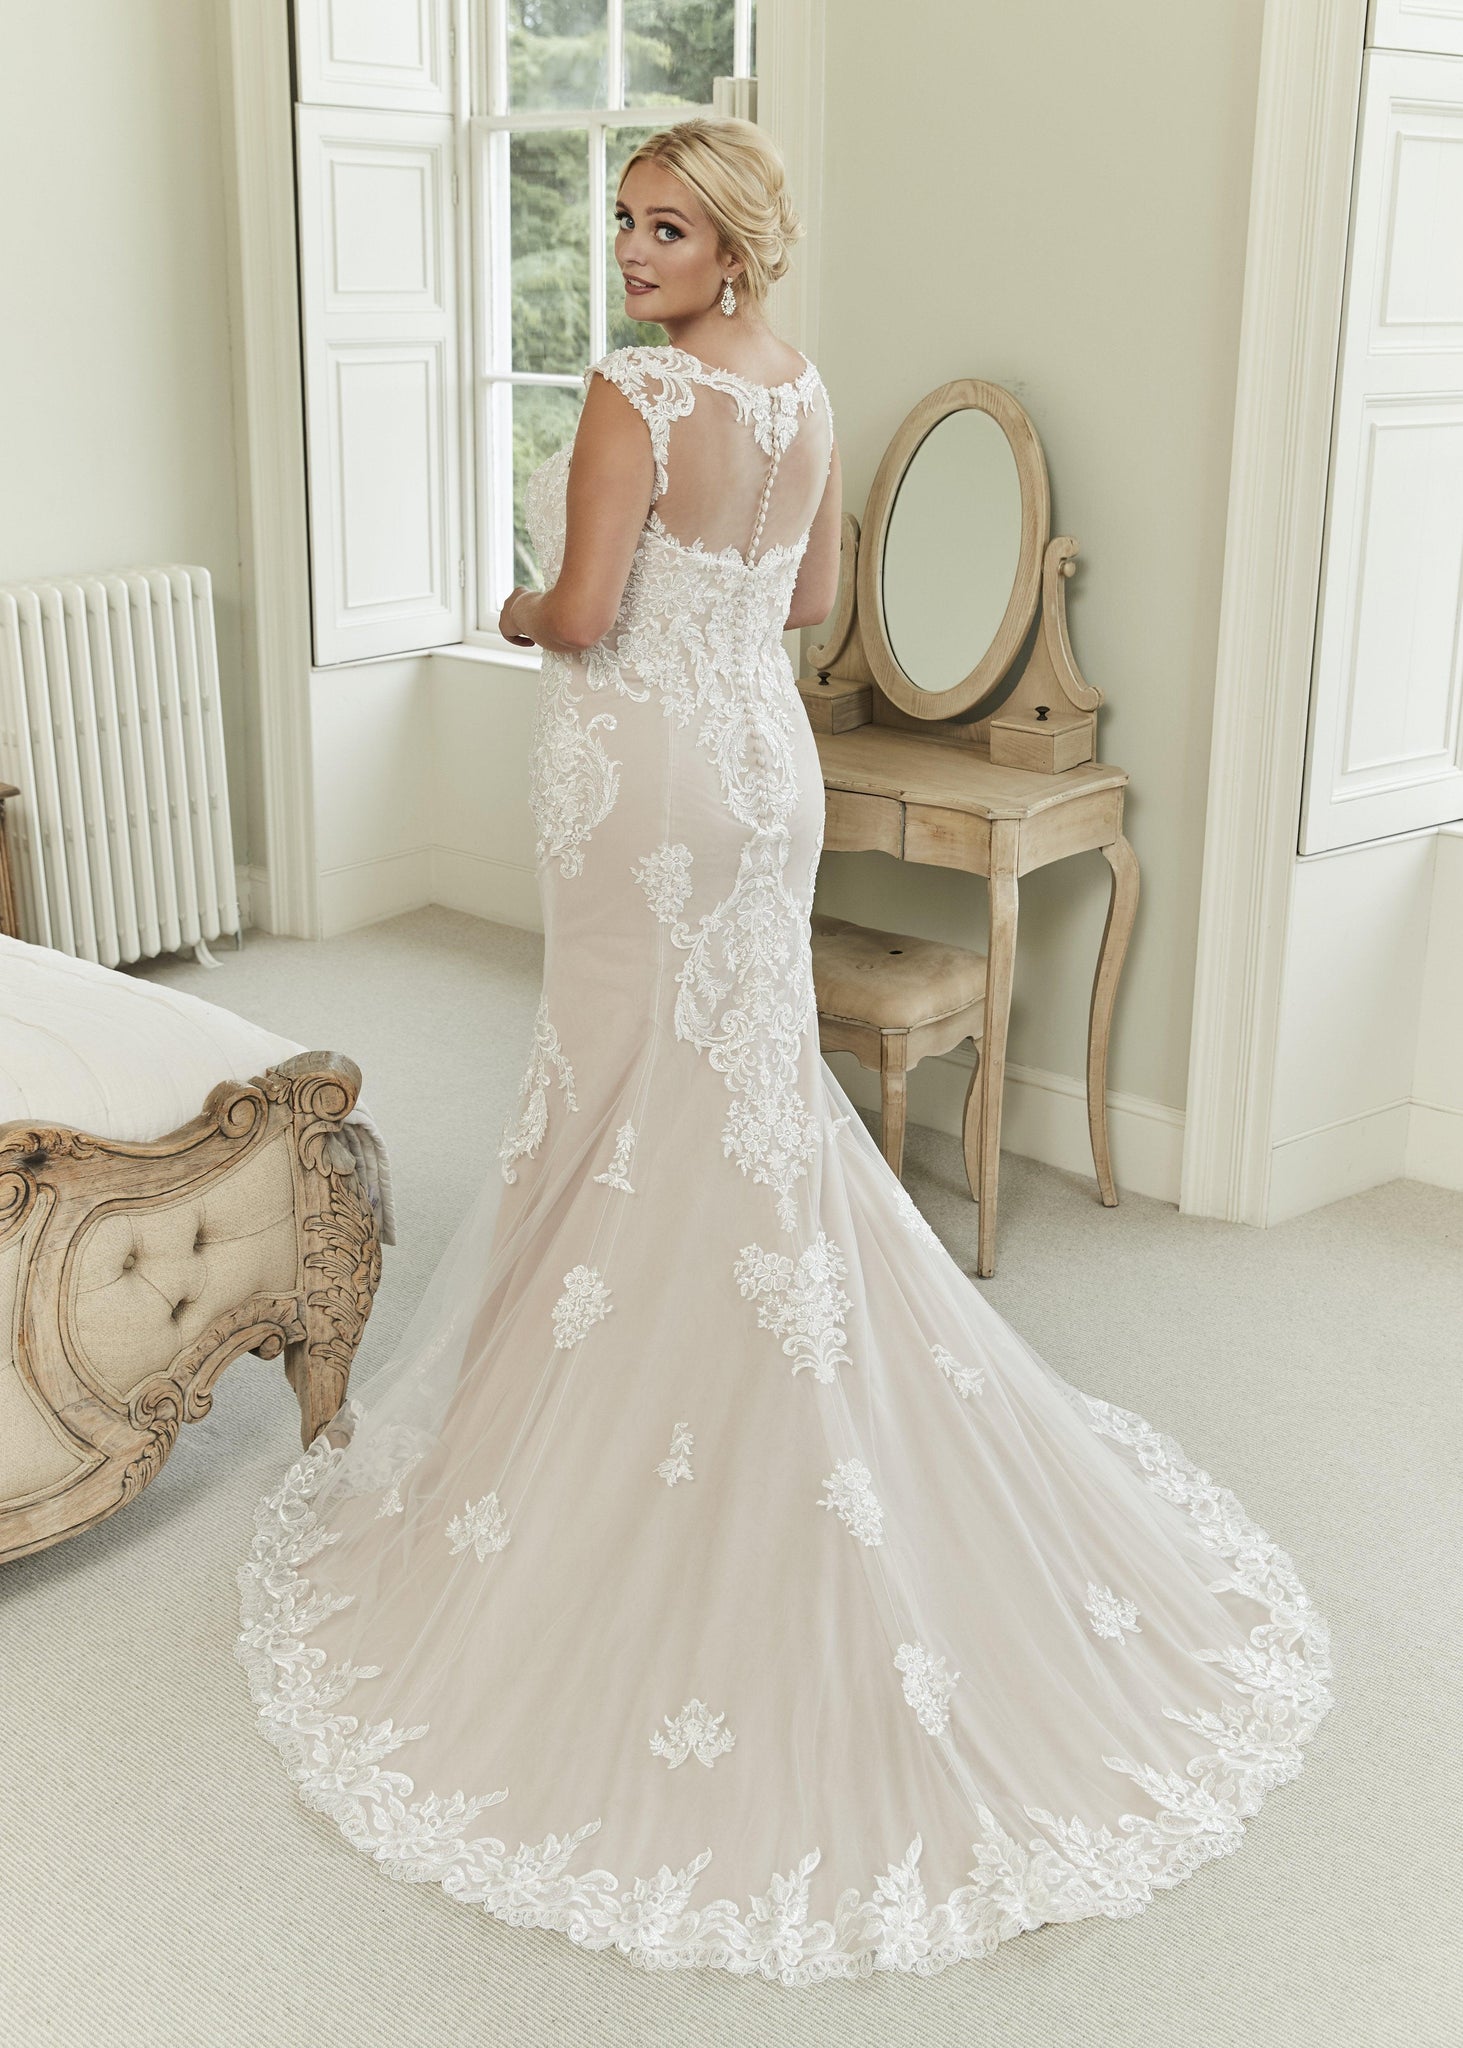 UK26 LisaMarie - Adore Bridal and Occasion Wear